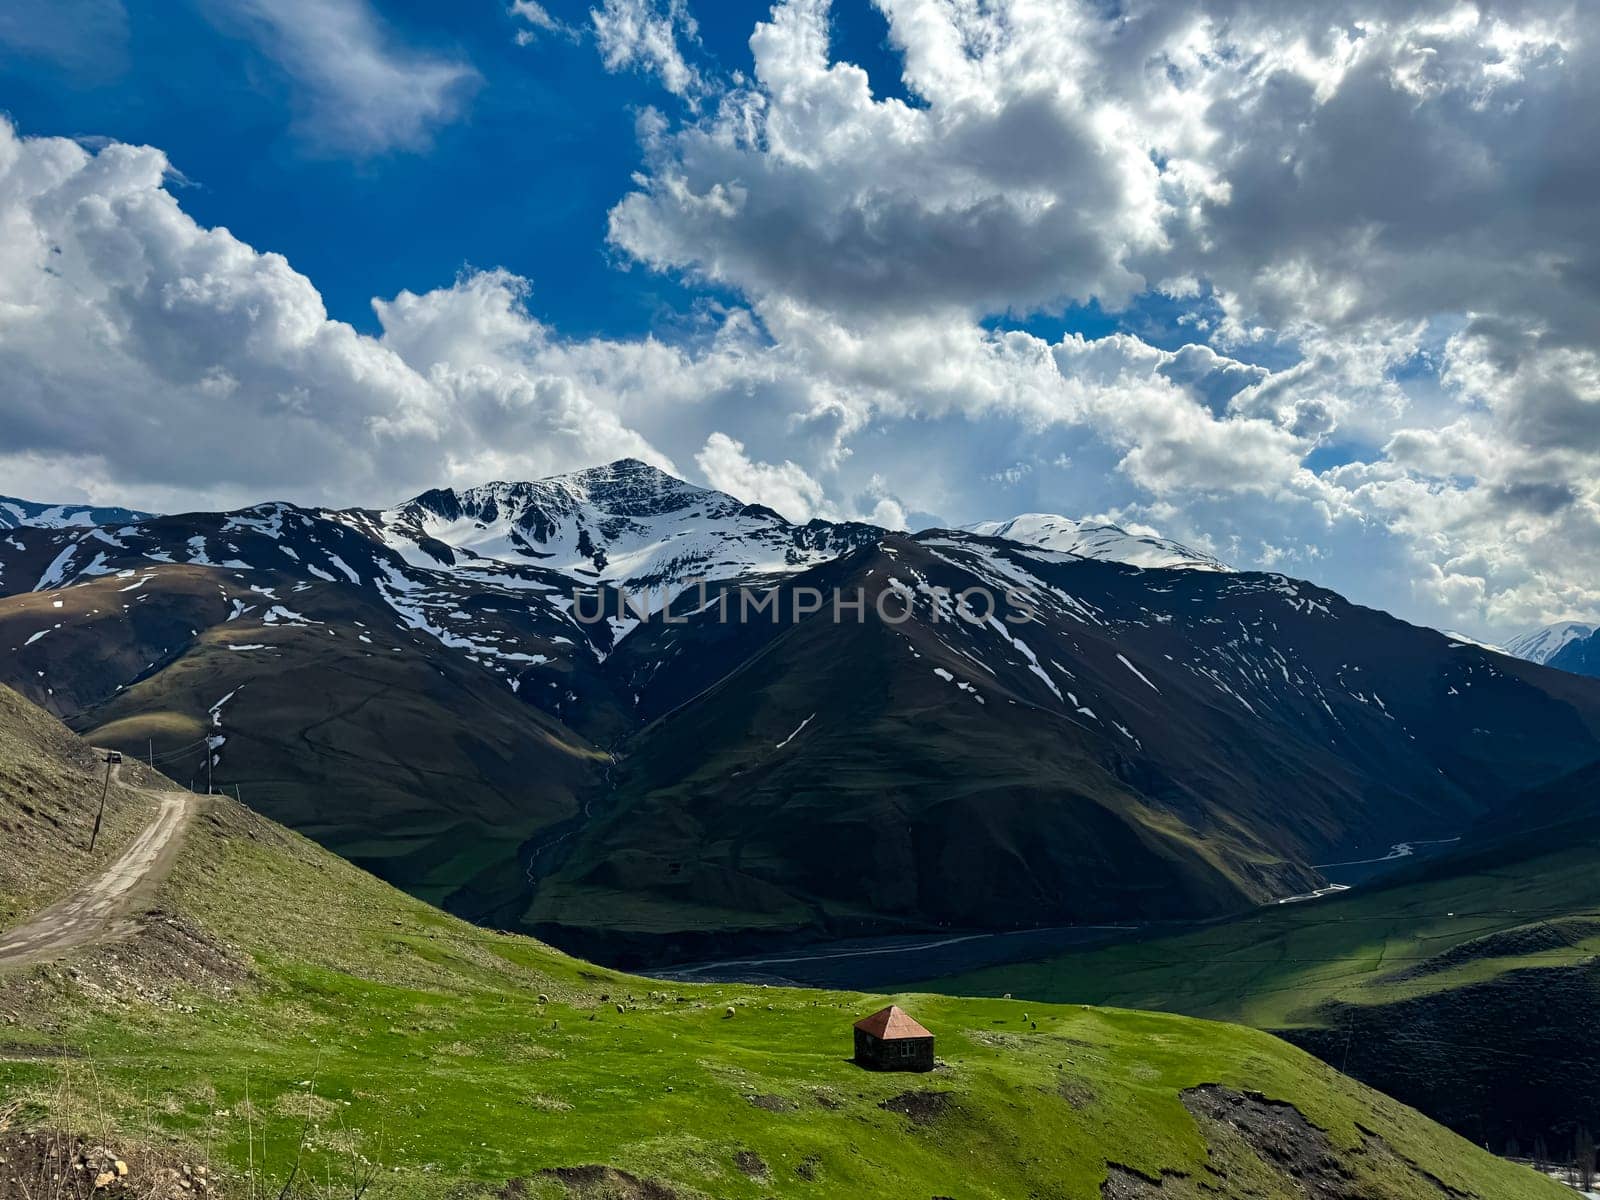 Solitary house in verdant valley with snow capped mountains under dynamic sky with billowing clouds, depicting isolation and beauty of nature. by Lunnica